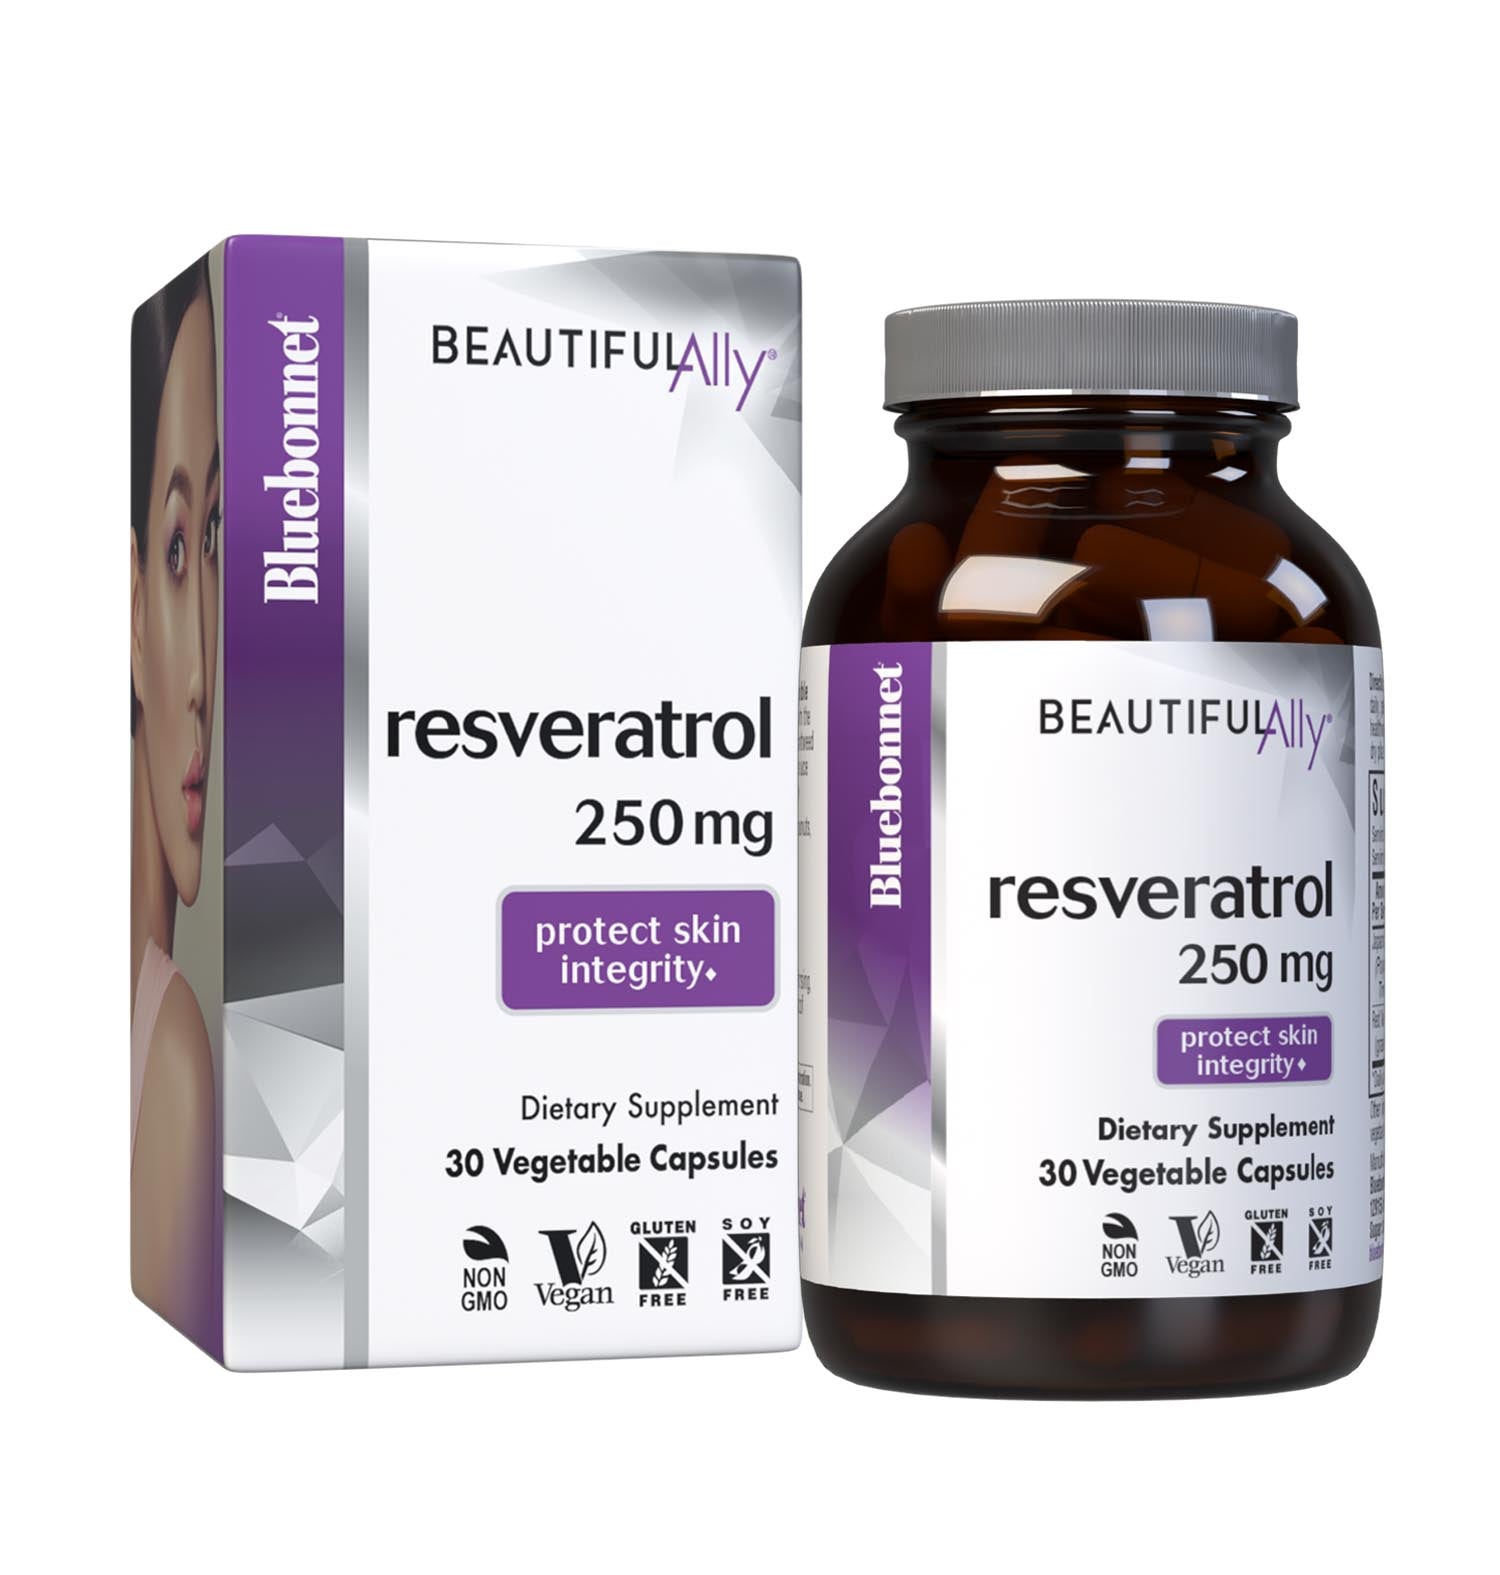 Bluebonnet’s Beautiful Ally Resveratrol 250 mg 30 Vegetable Capsules are specially formulated to help protect skin with the active trans isomer form of resveratrol from Japanese knotweed and 4:1 red wine extract from grape berry fruit to help reduce free-radical damage, which may improve skin integrity. Bottle with box. #size_30 count